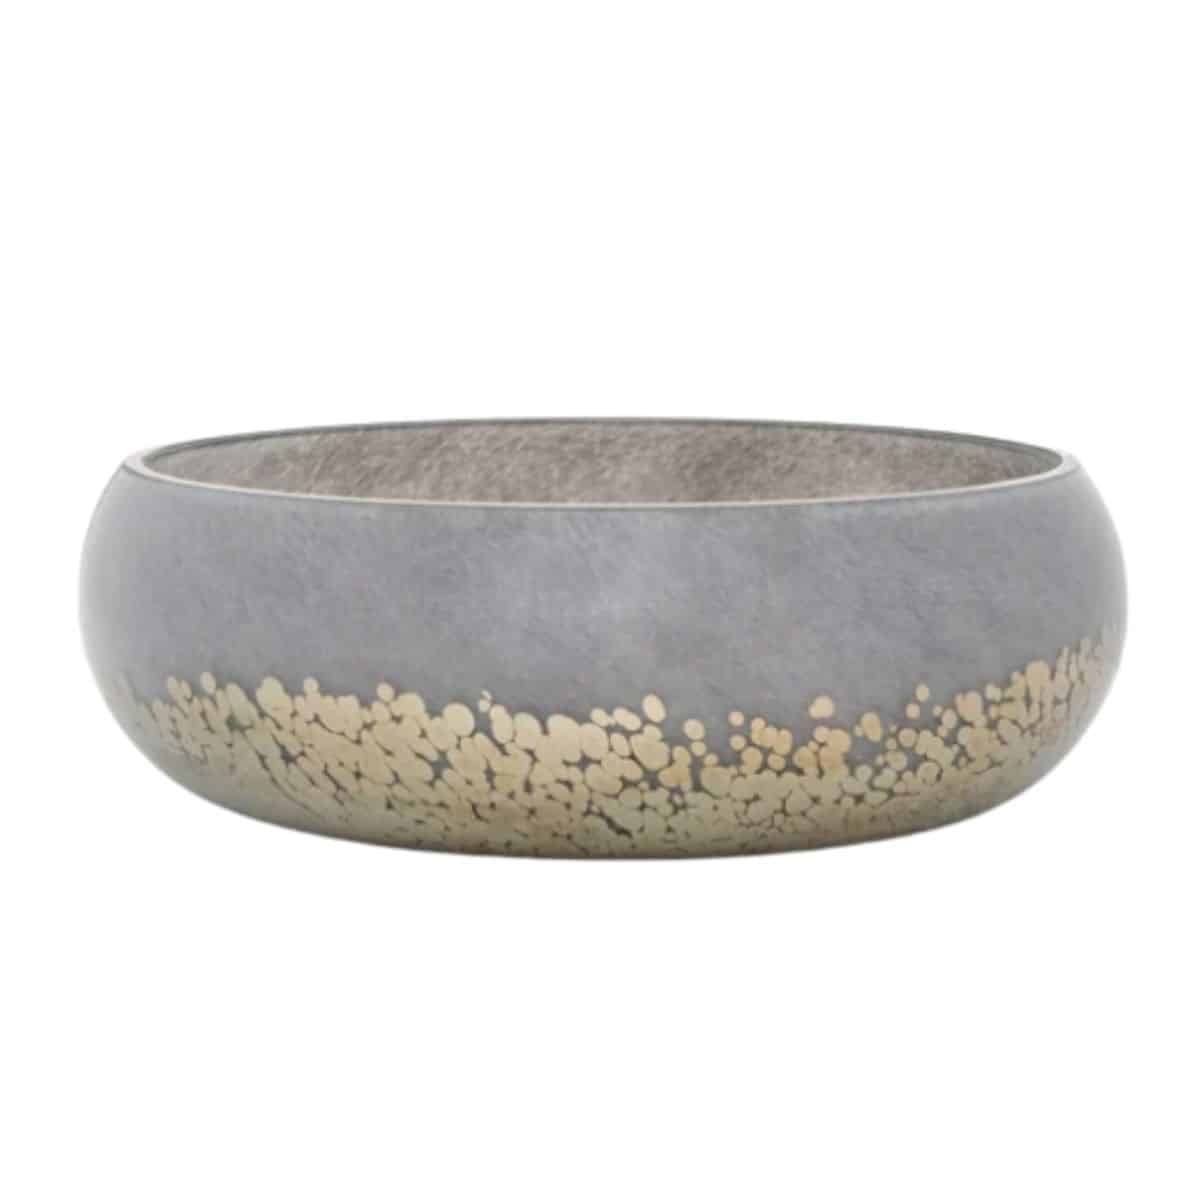 grey and tan shallow glass bowl from etsy